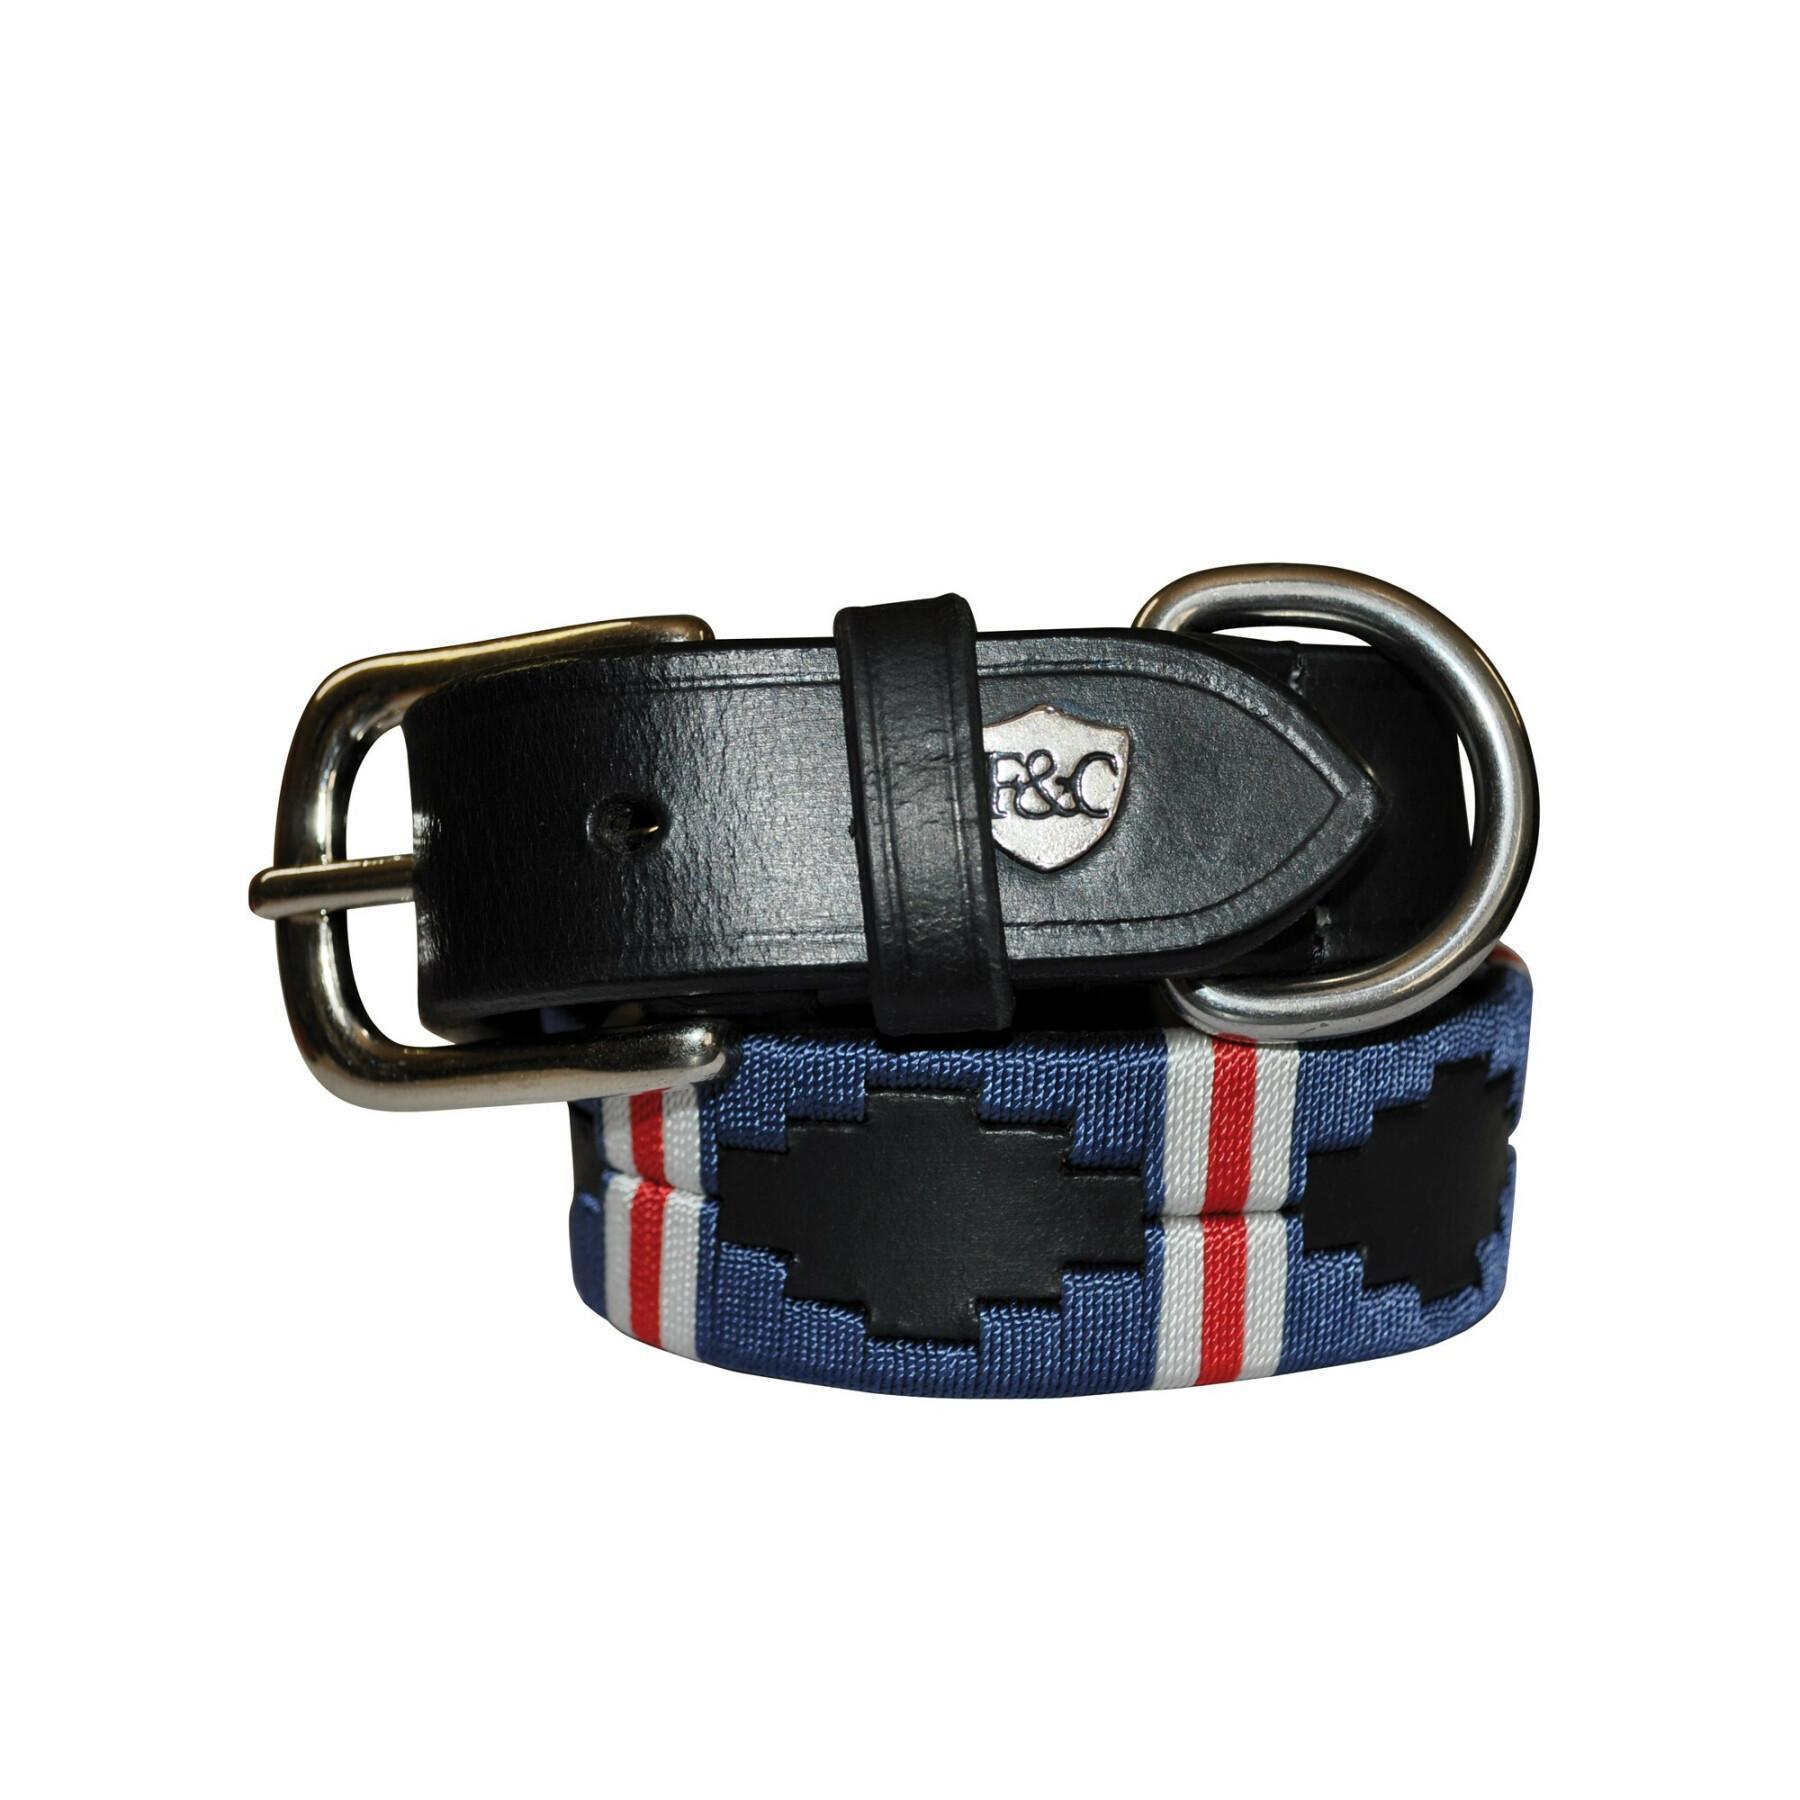 Collare per cani Flags&Cup Chukka